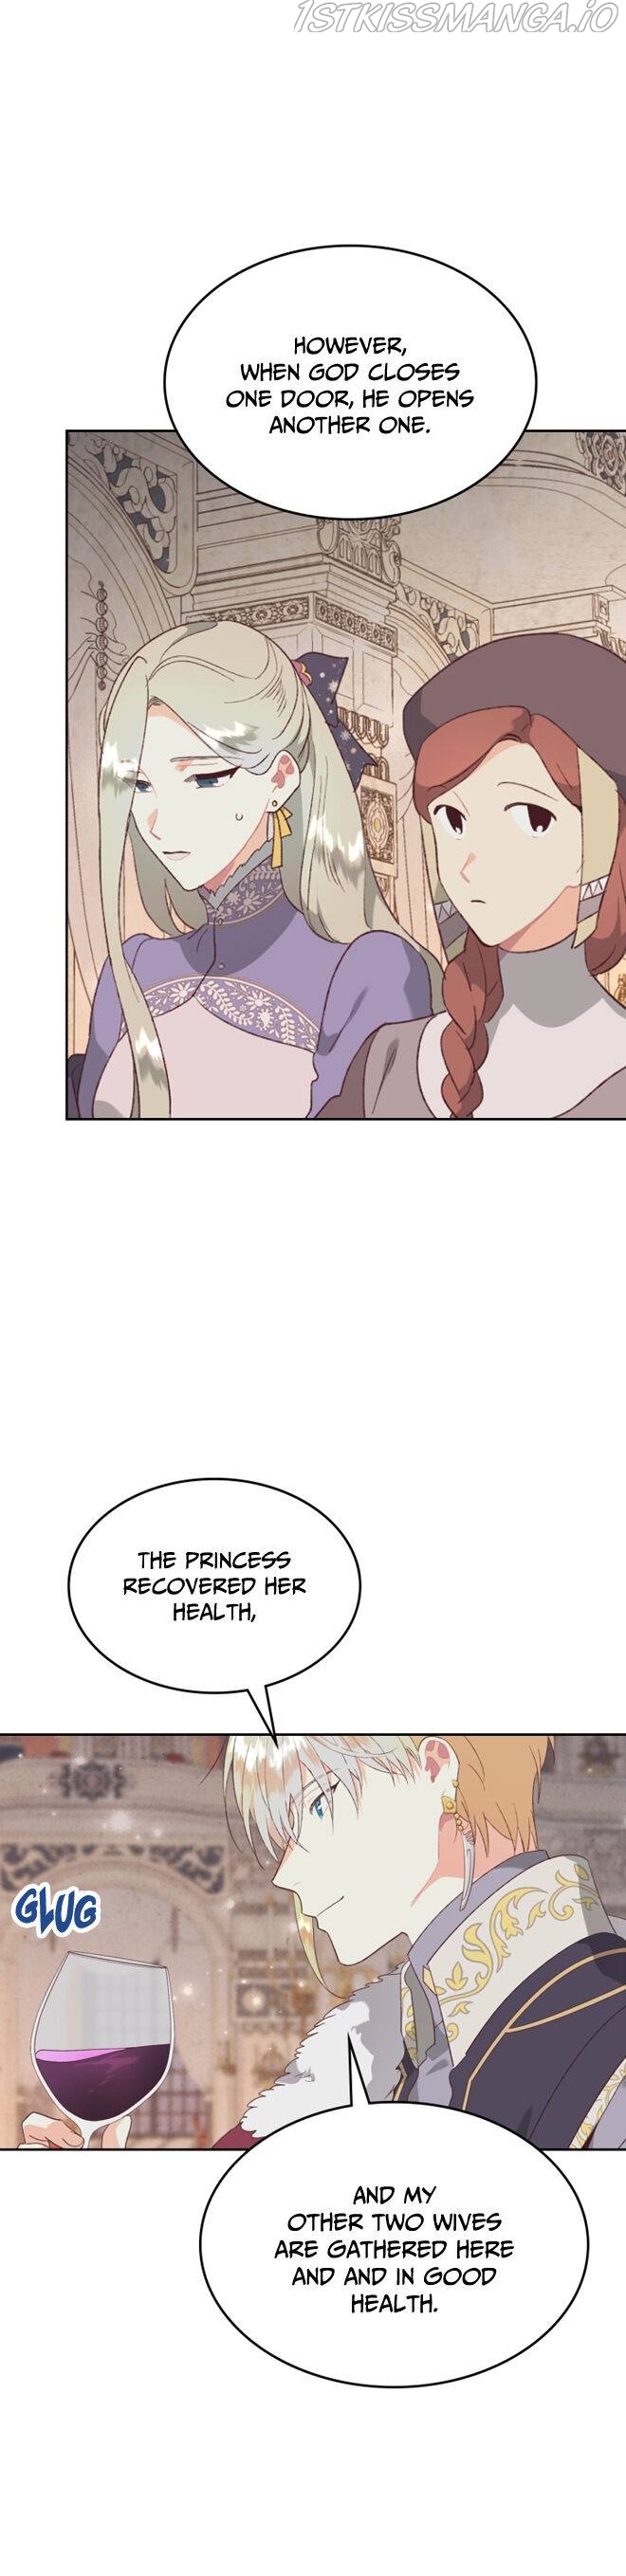 Emperor And The Female Knight ( The King and His Knight ) Chapter 133 - Page 2